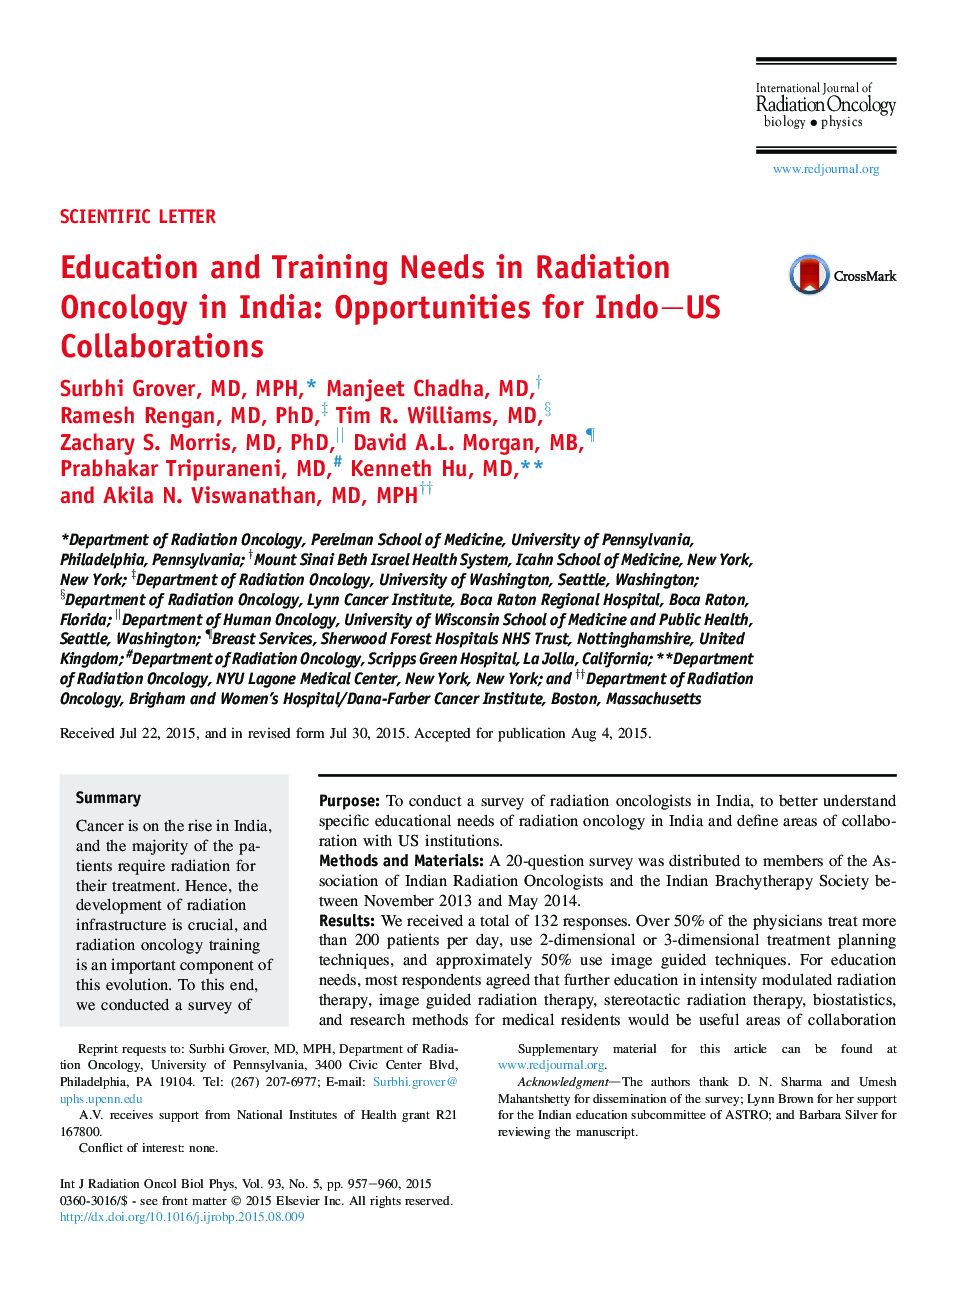 Education and Training Needs in Radiation Oncology in India: Opportunities for Indo-US Collaborations